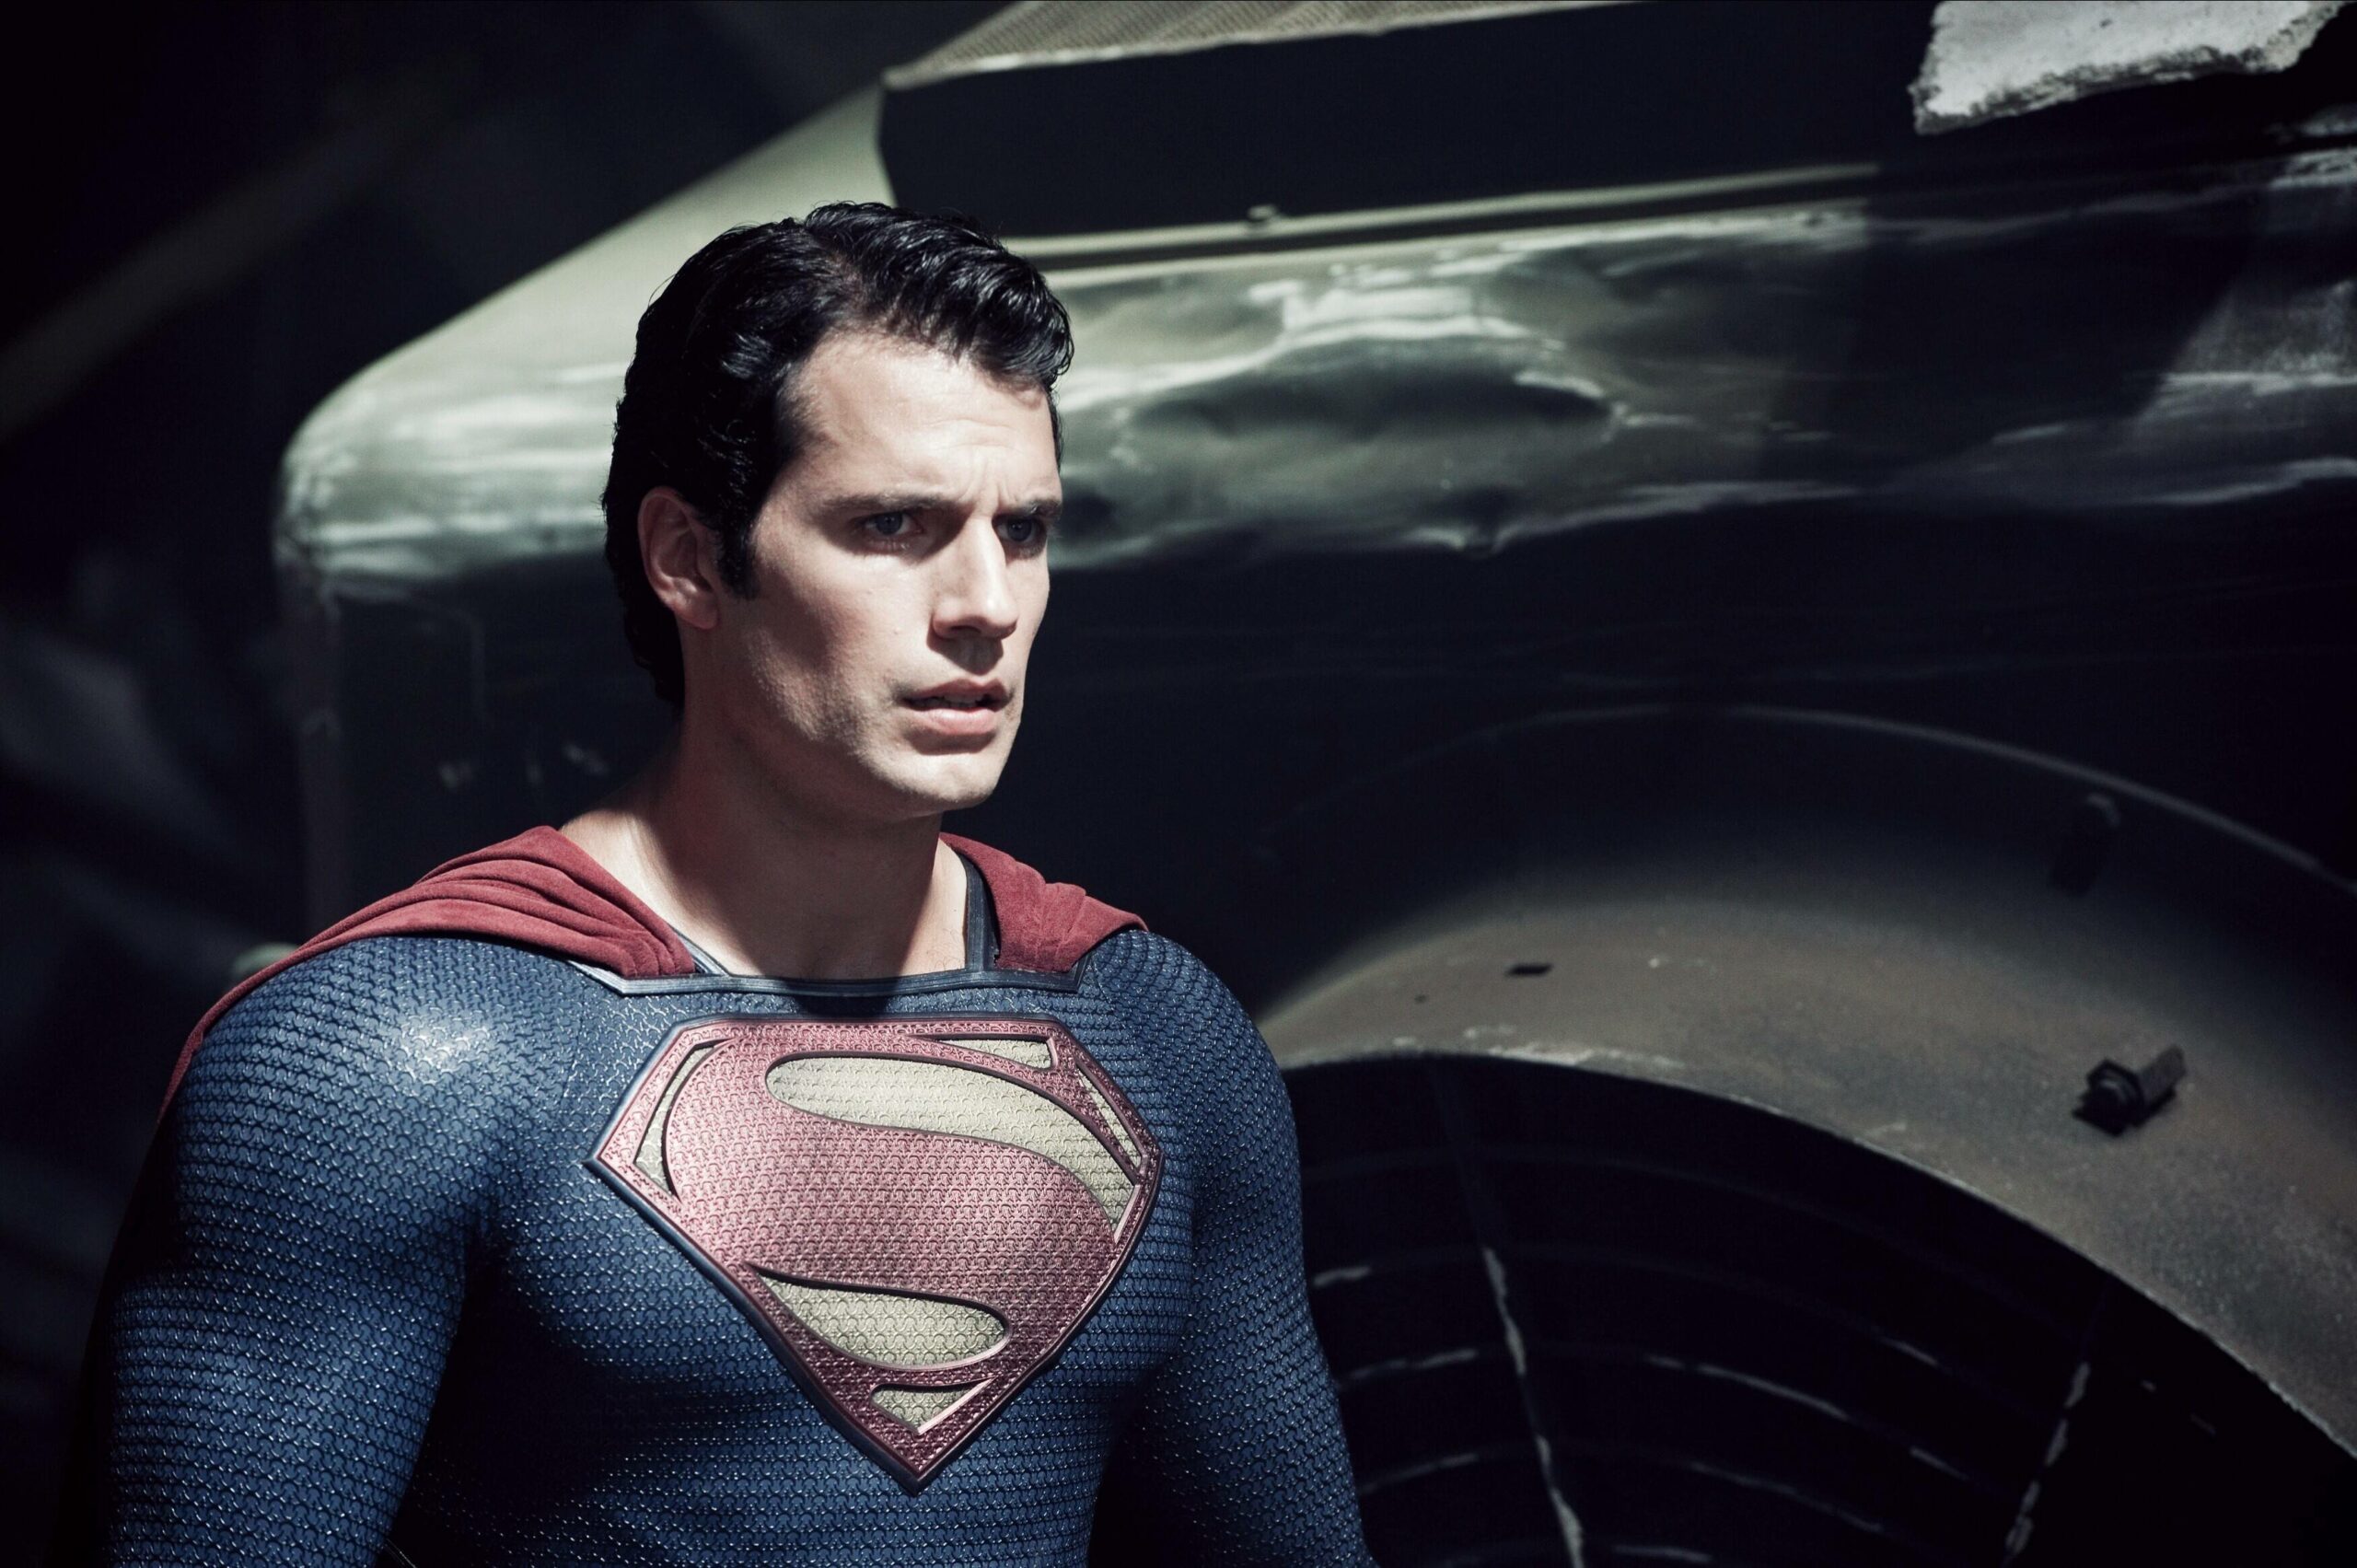 From Superman to Cardio Secrets: Henry Cavill's Iconic Moments and Hollywood Journey